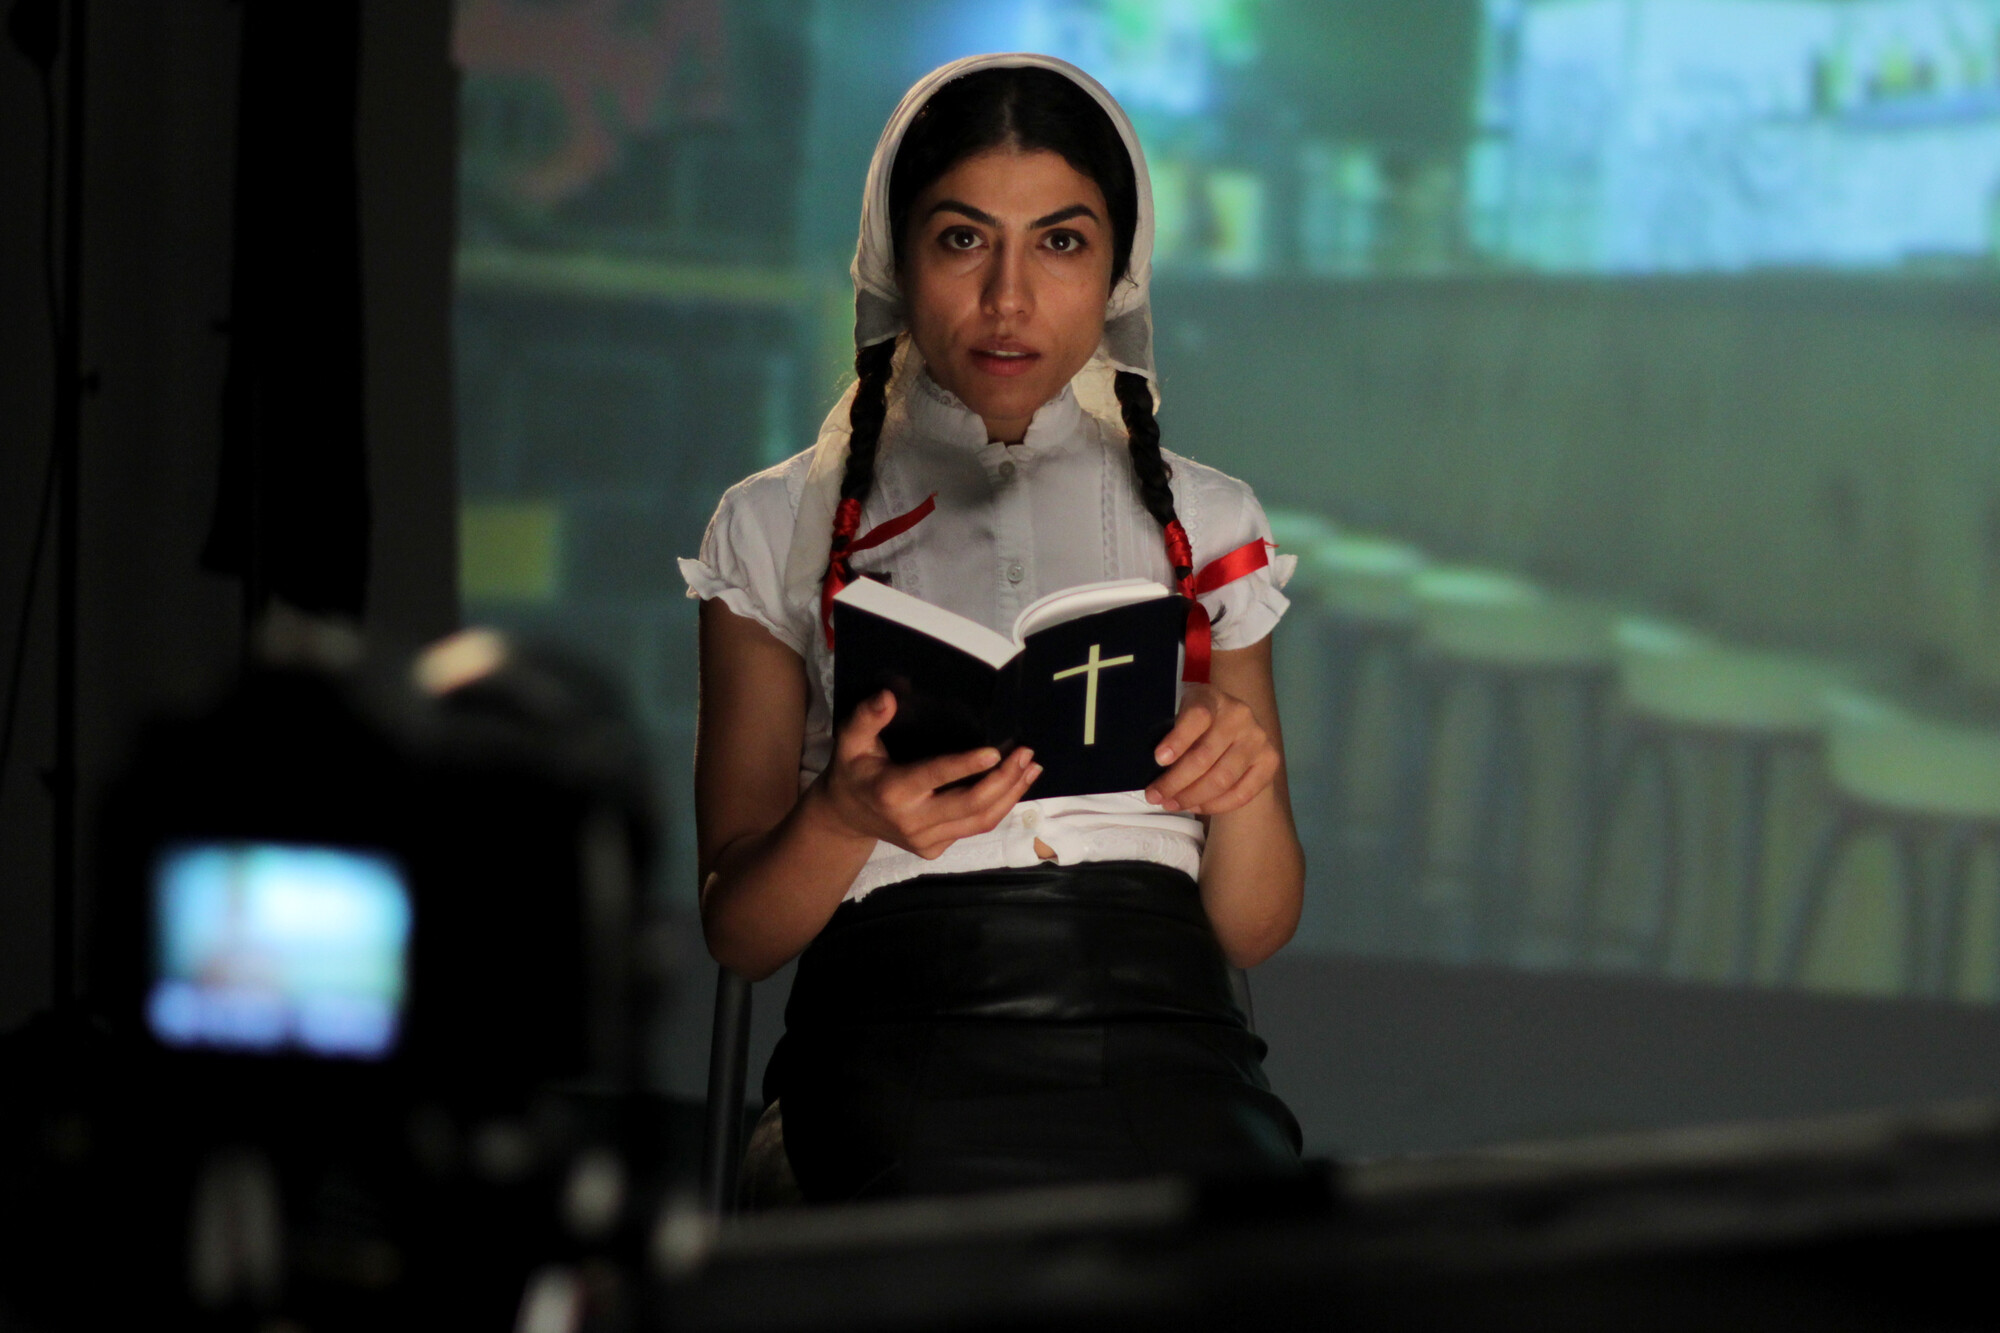 A woman reads from a bible onstage.